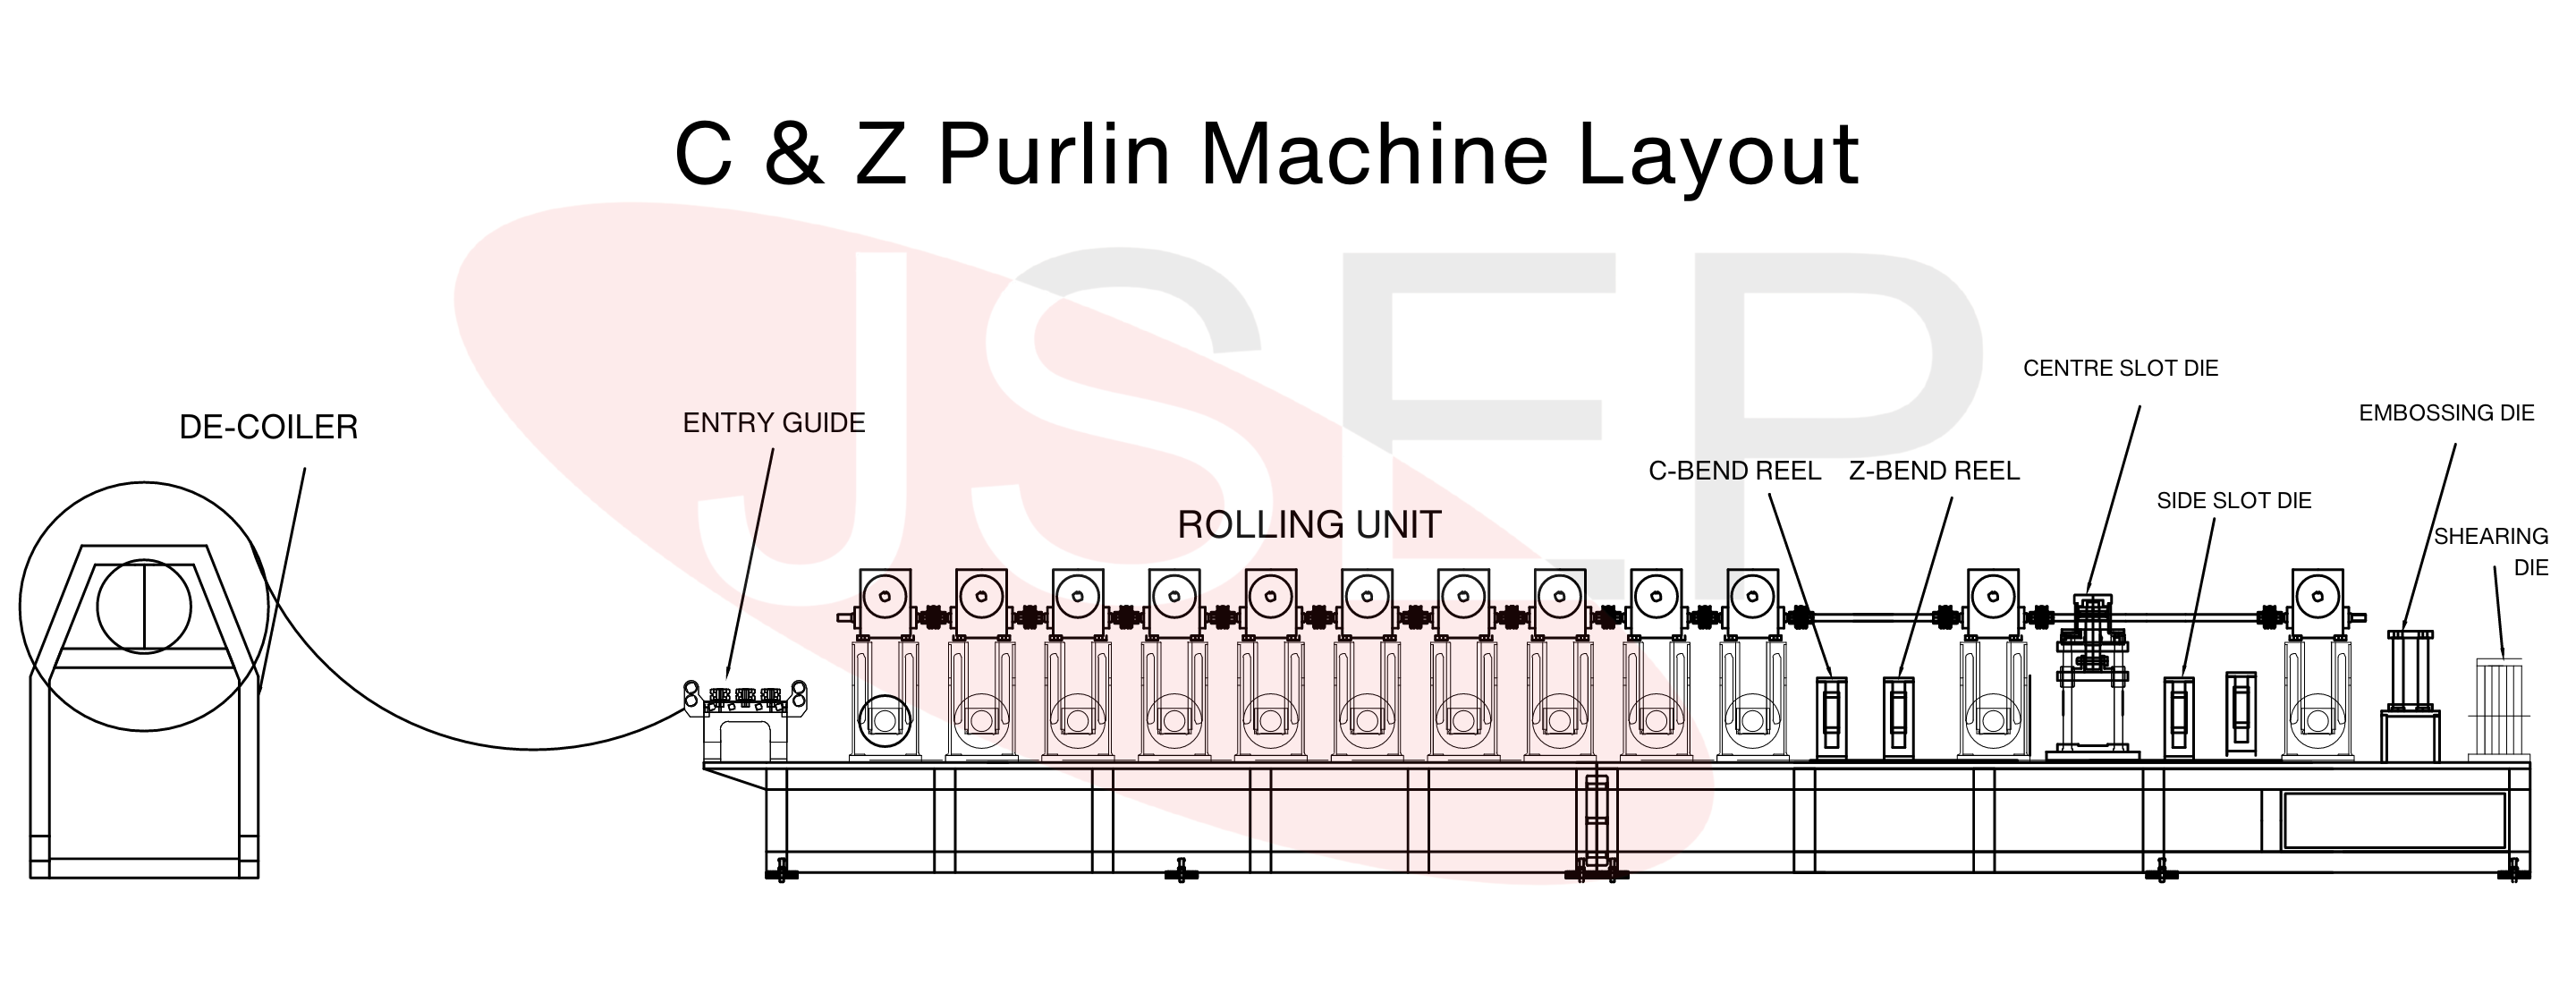 Layout for purlin machine by jseprojects